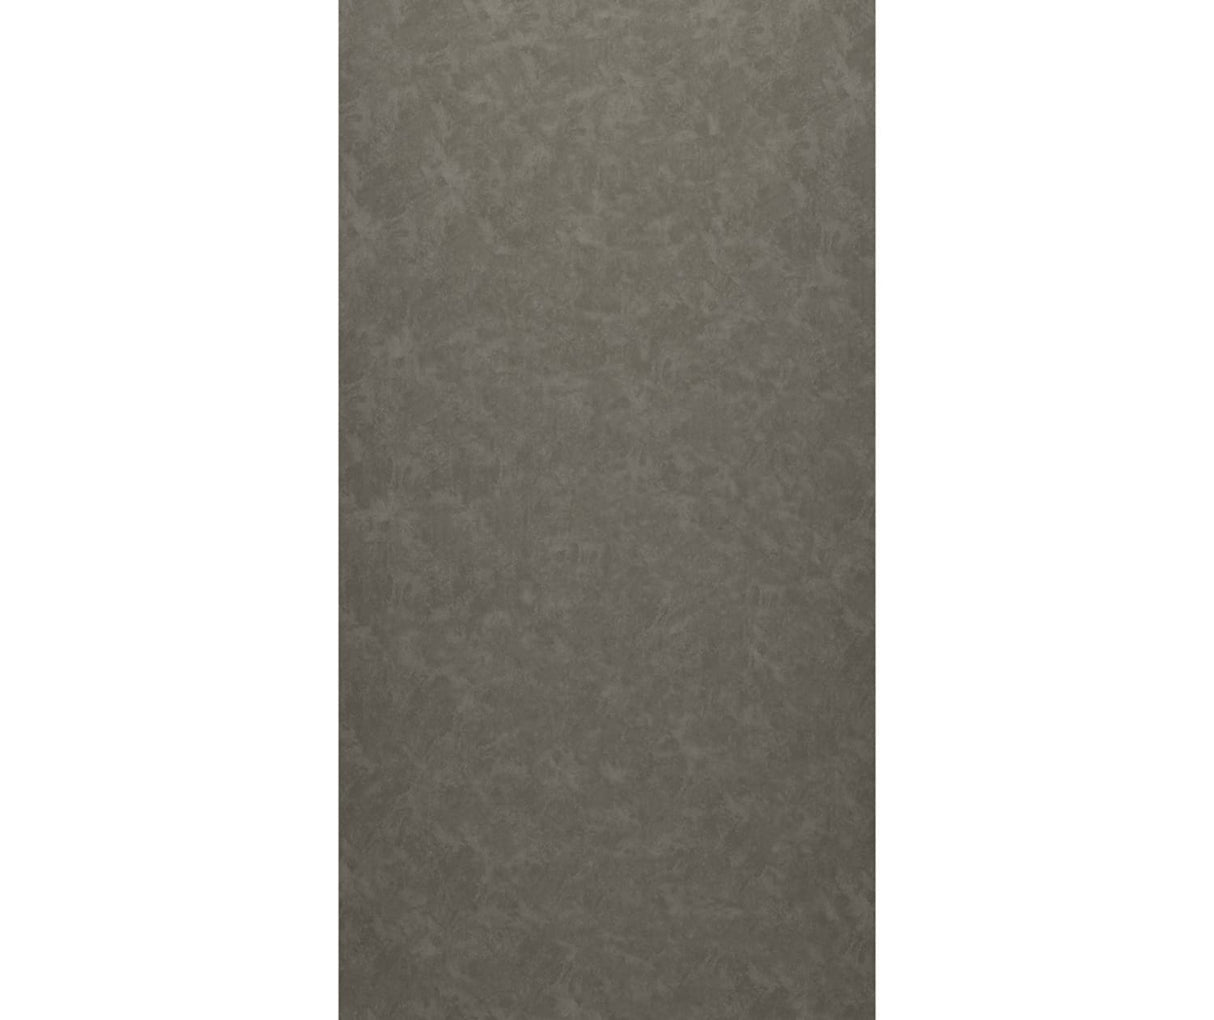 Swanstone SMMK-7232-1 32 x 72 Swanstone Smooth Tile Glue up Bathtub and Shower Single Wall Panel in Charcoal Gray SMMK7232.209